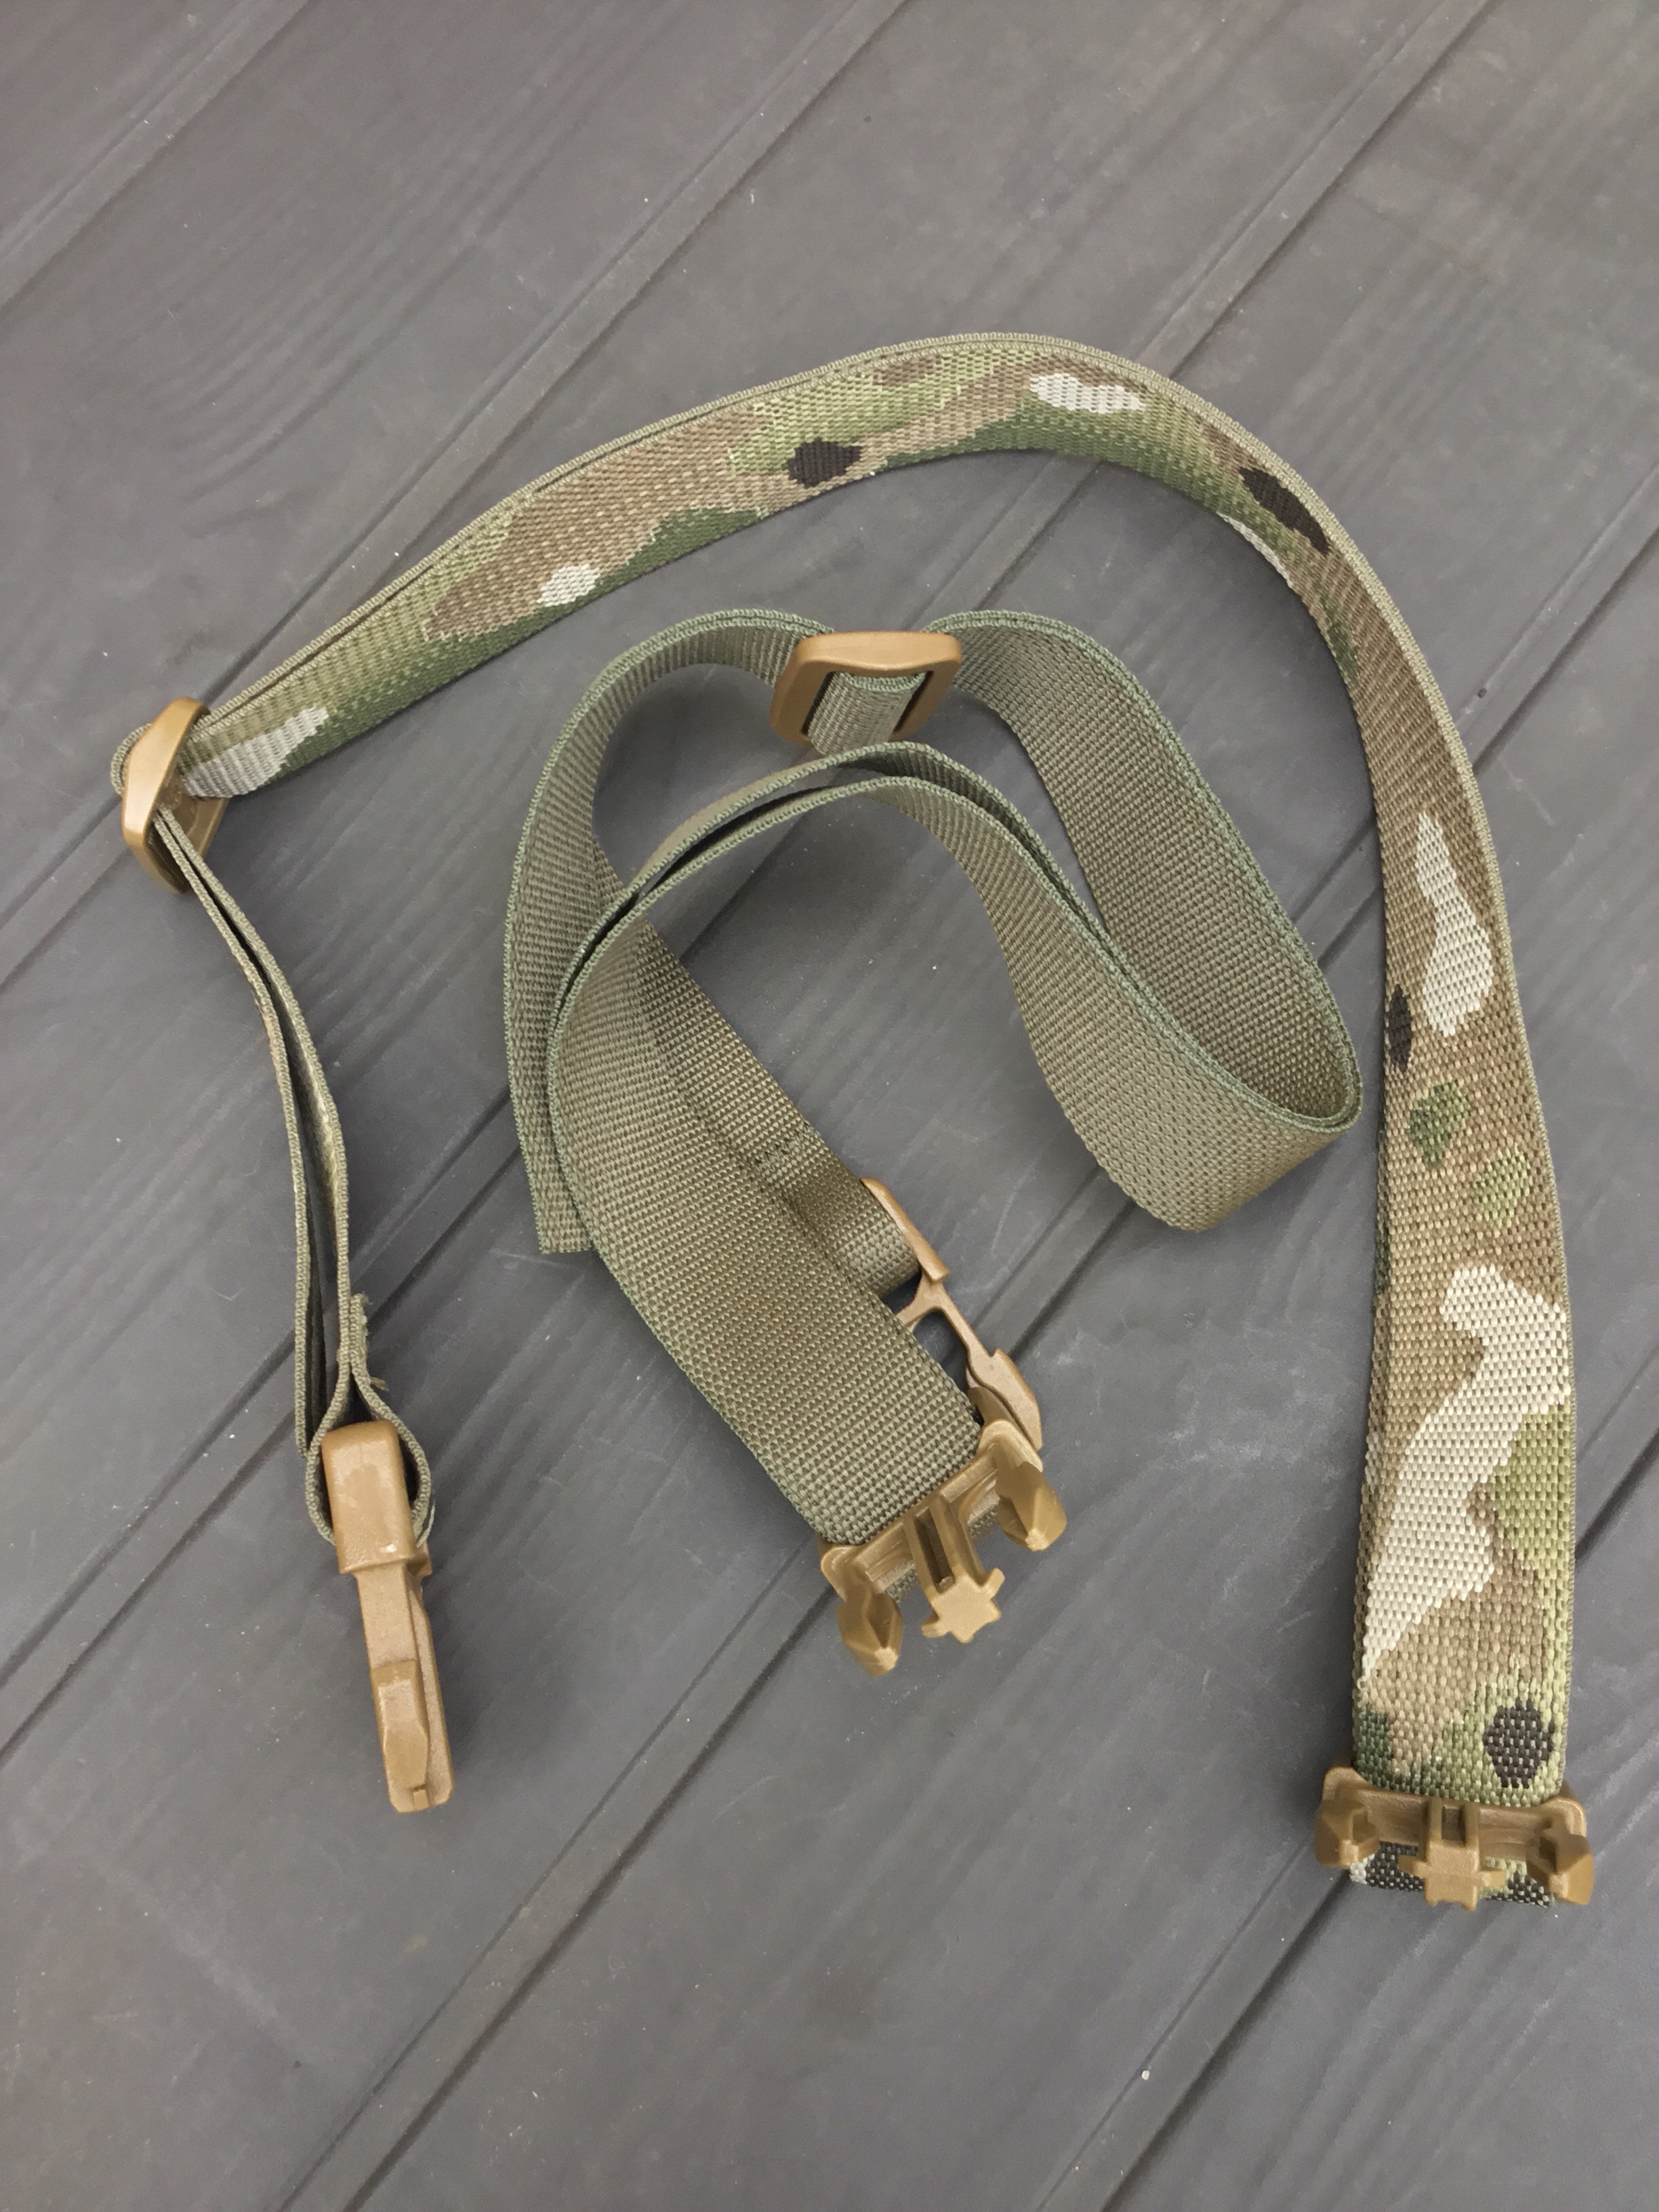 REVIEW: Ferro Concepts The Chesty V1 – Mini Harness and Wide 